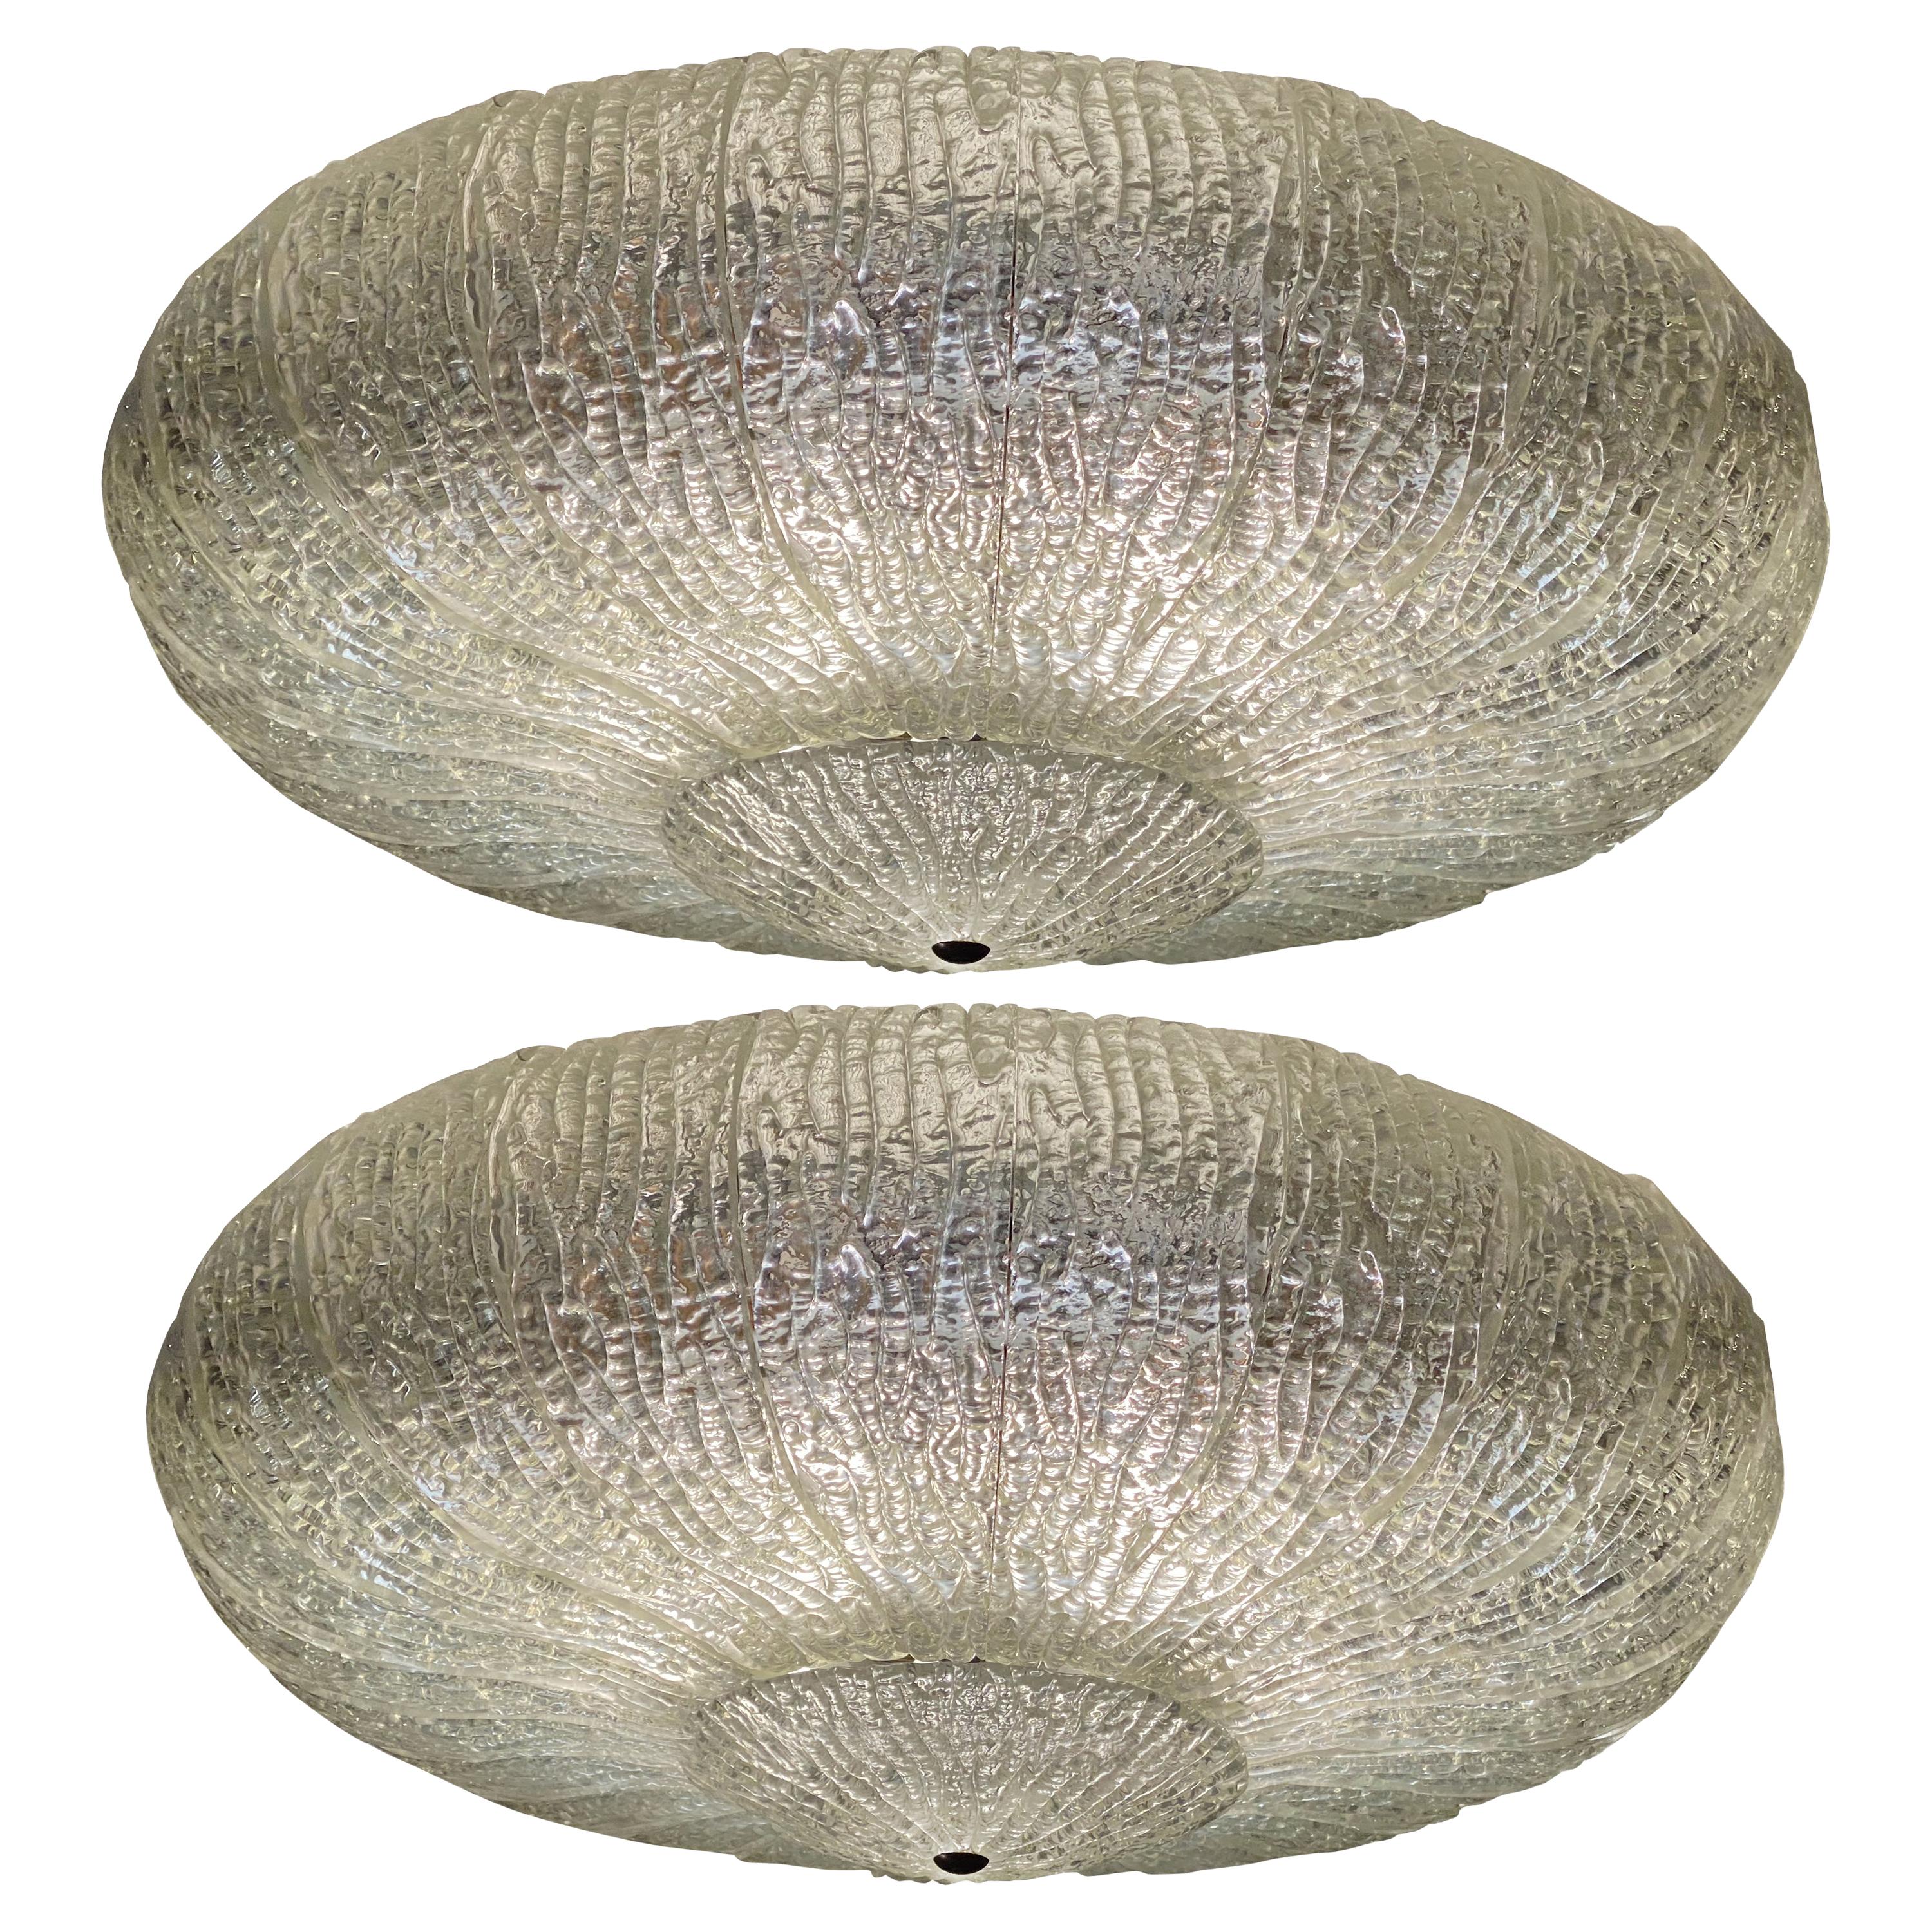 Pair Original Large Ceiling Flush Mount Lights by Barovier & Toso, Murano, 1940s For Sale